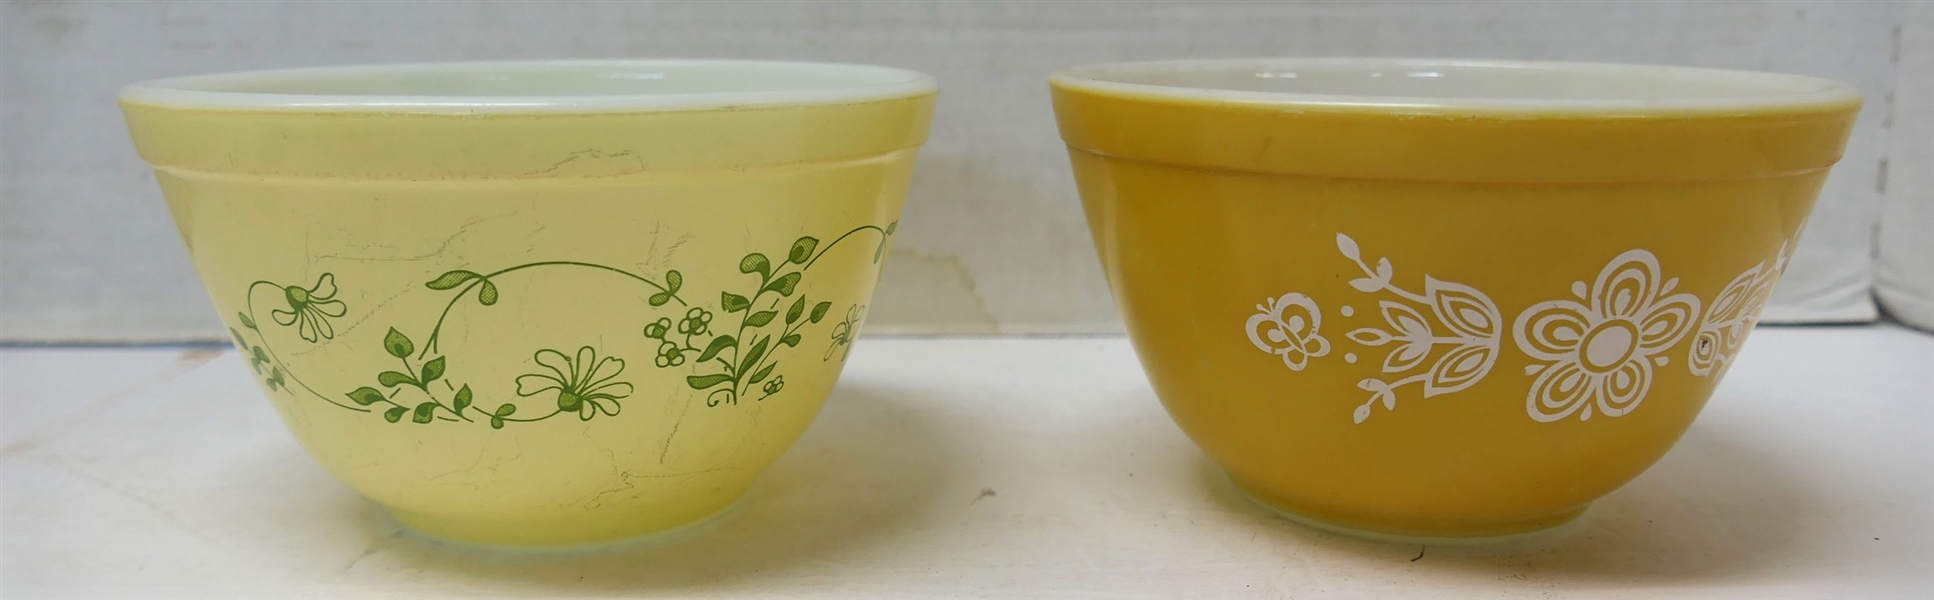 2 Small 1 1/2 Pint Pyrex Mixing Bowls - Yellow with White Flowers and Light Yellow with Green Flowers